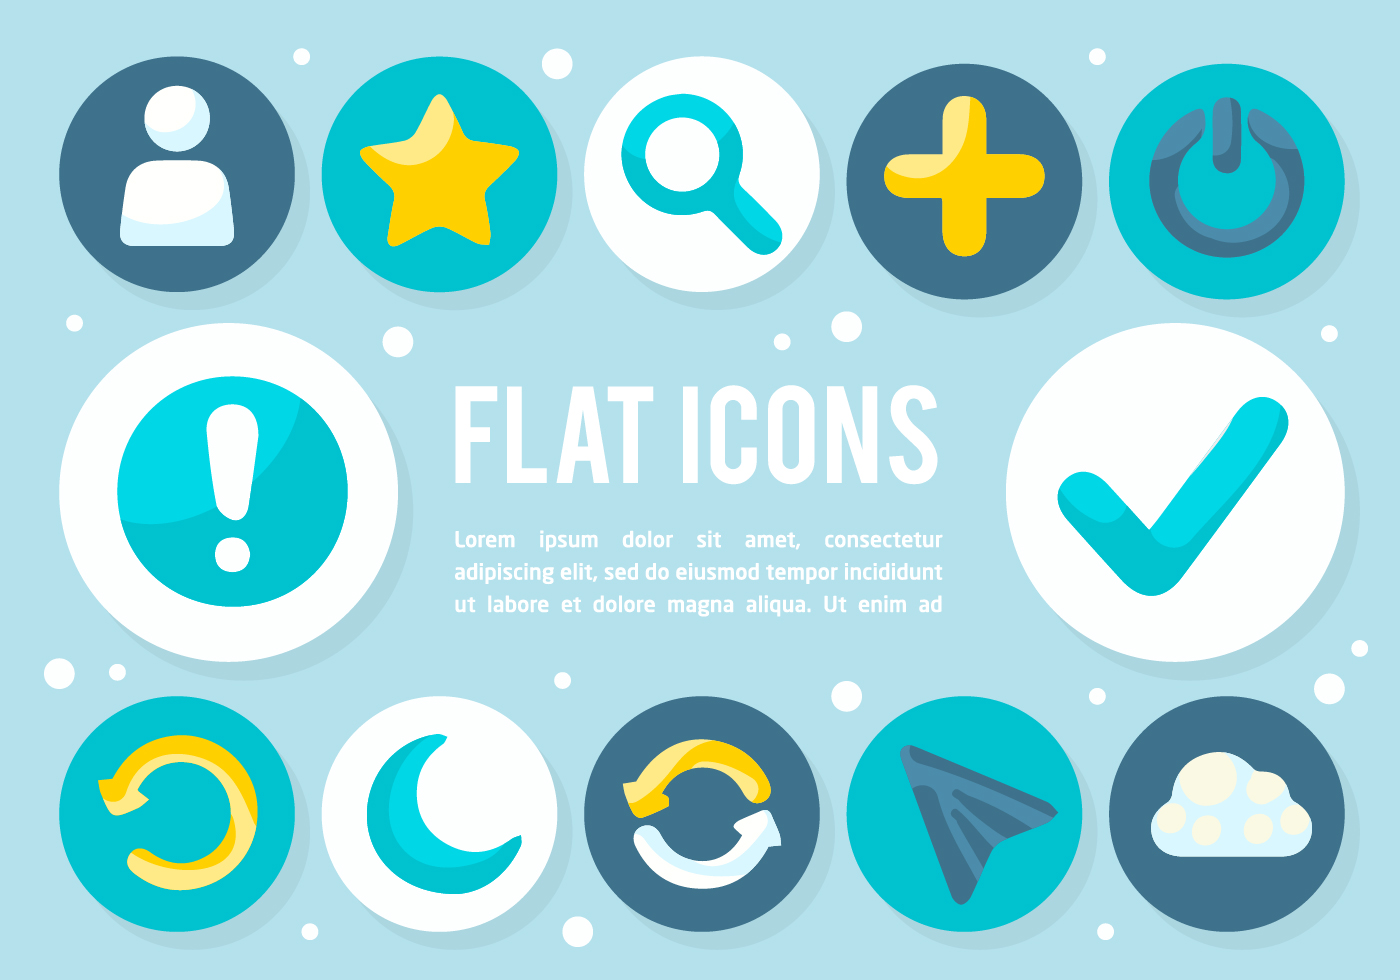 Download Free Flat Icons Vector Background - Download Free Vector ...